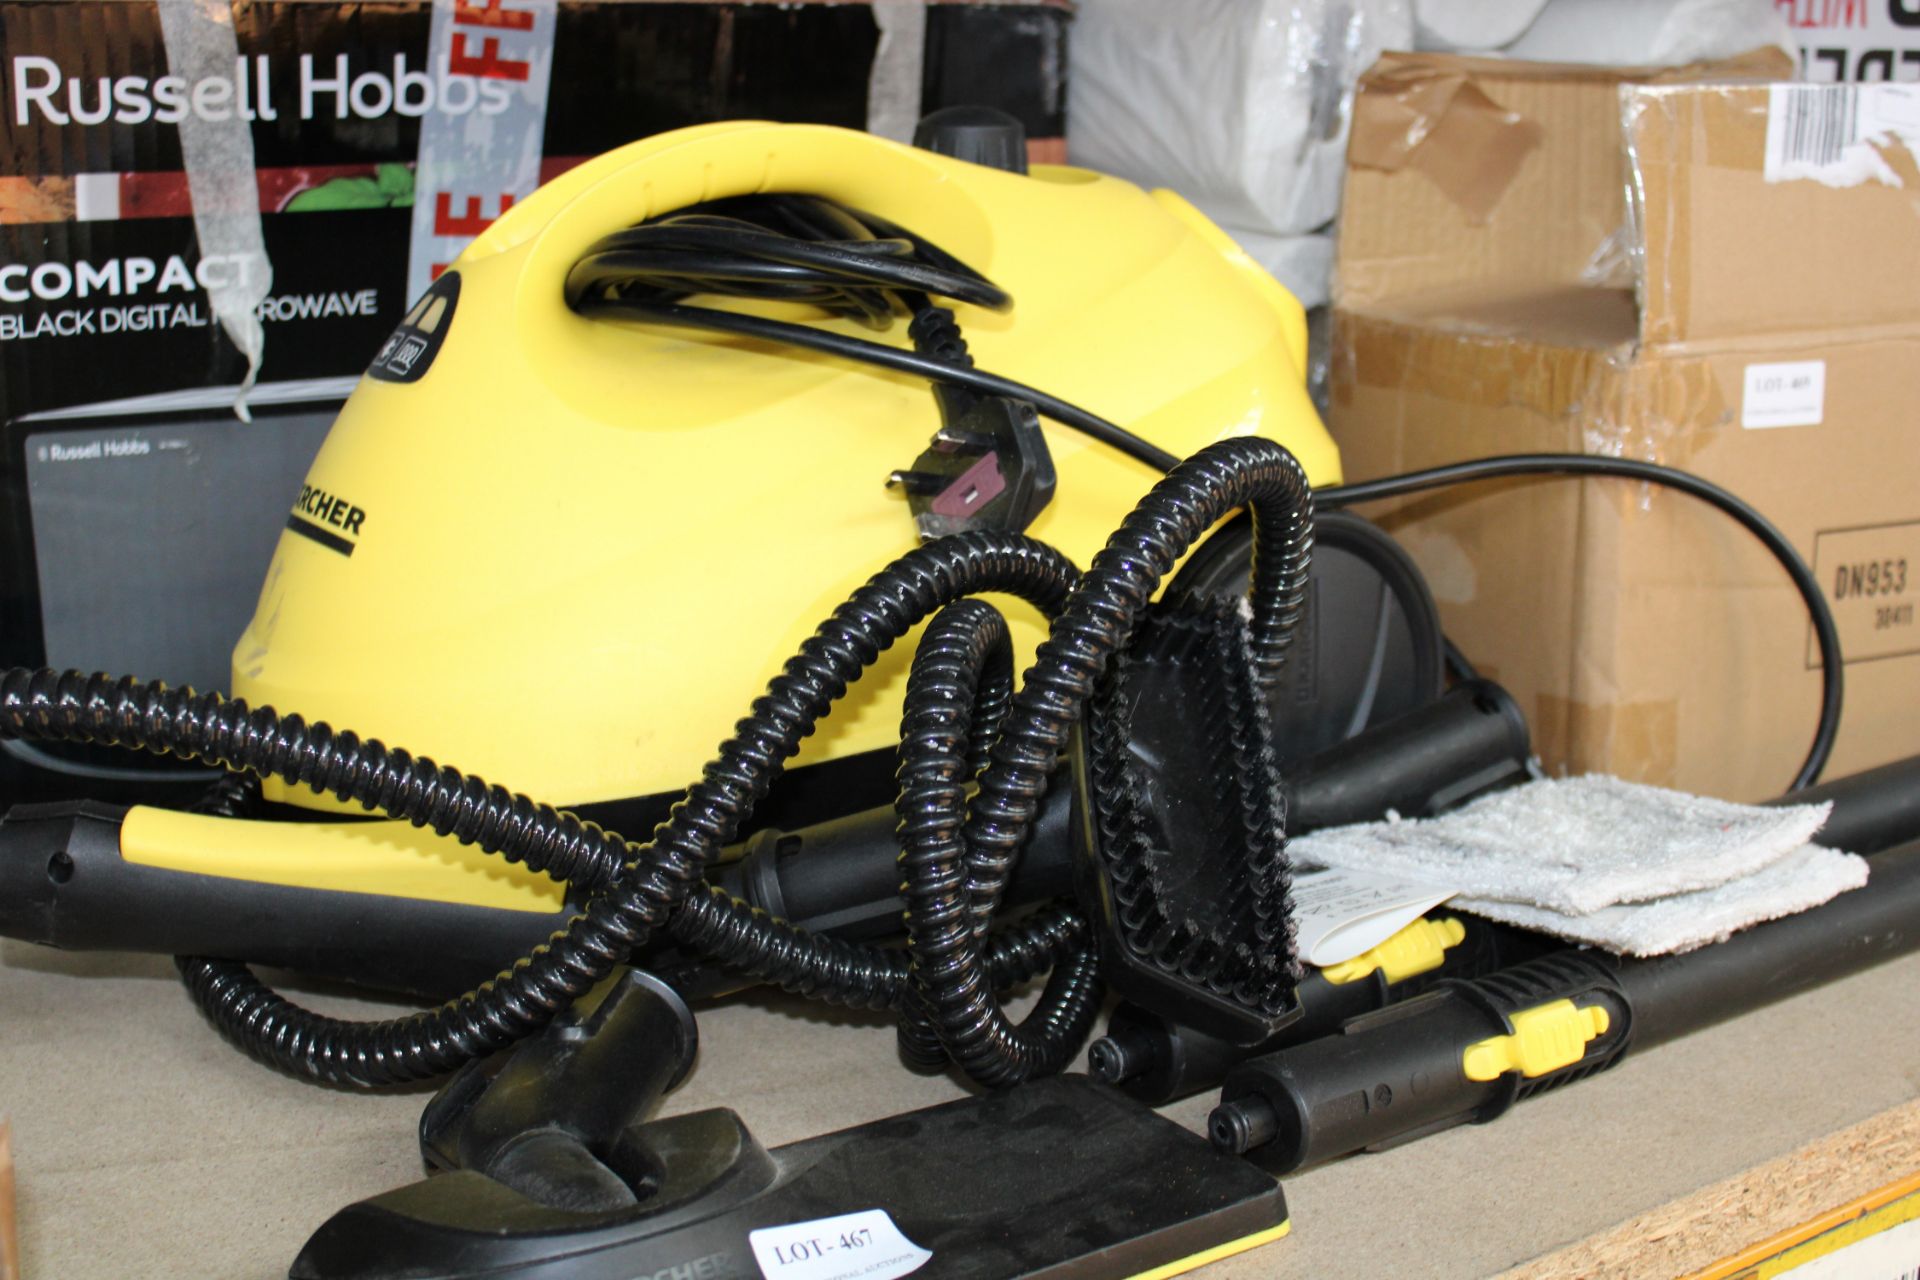 UNBOXED KARCHER SC2 PRESSURE WASHER RRP £139.00Condition ReportAppraisal Available on Request- All